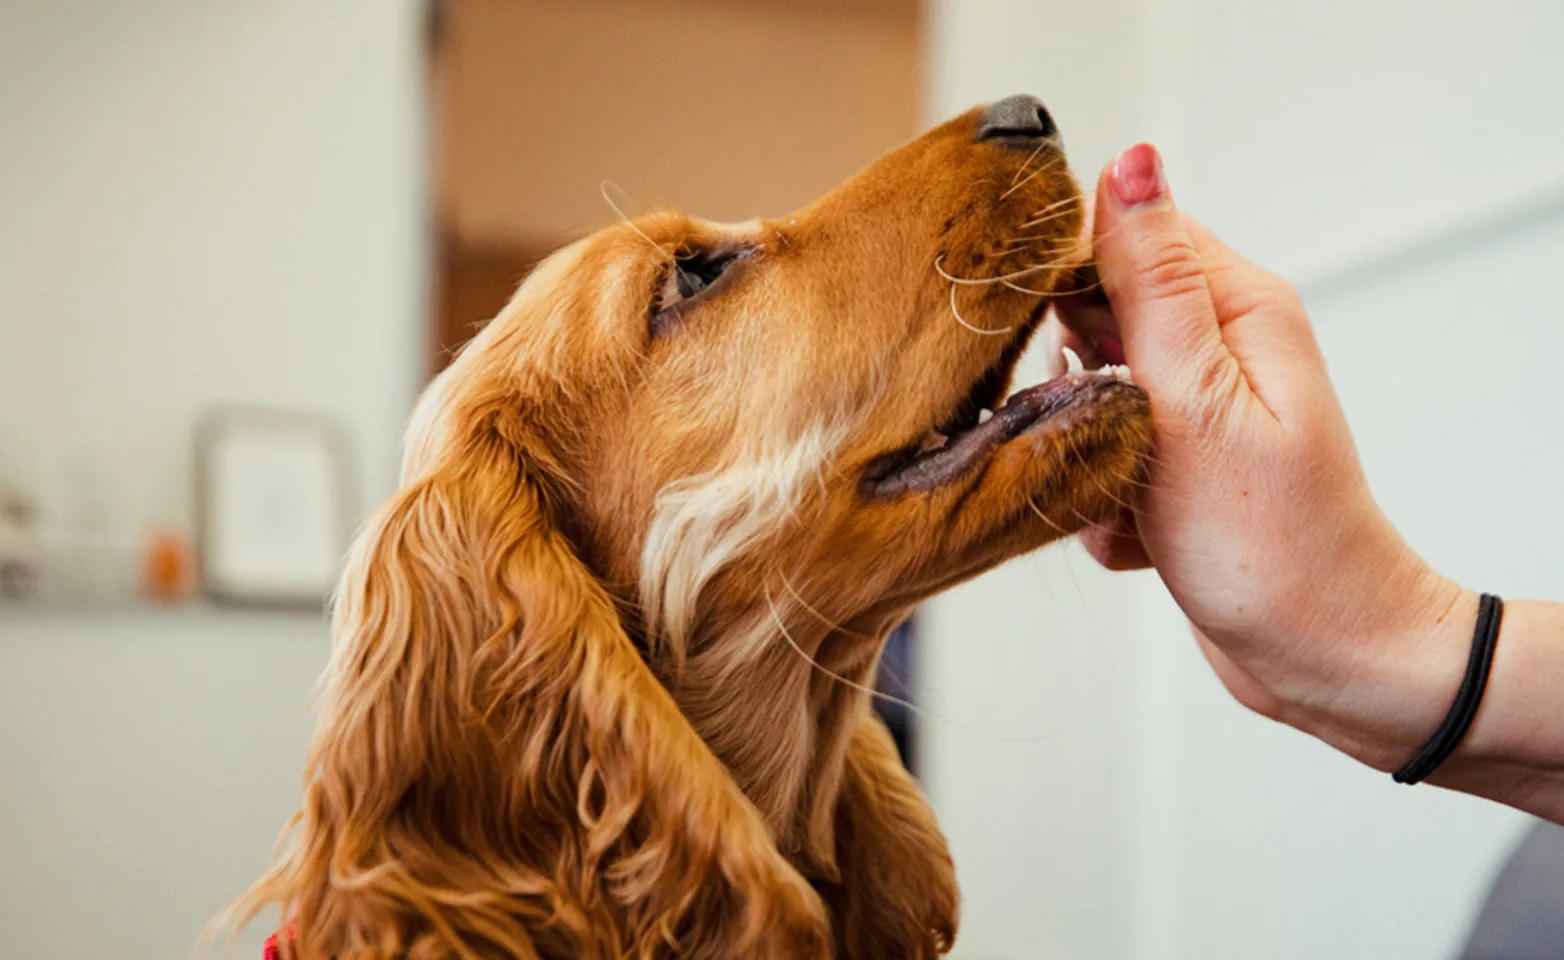 Dog eating treat out of hand